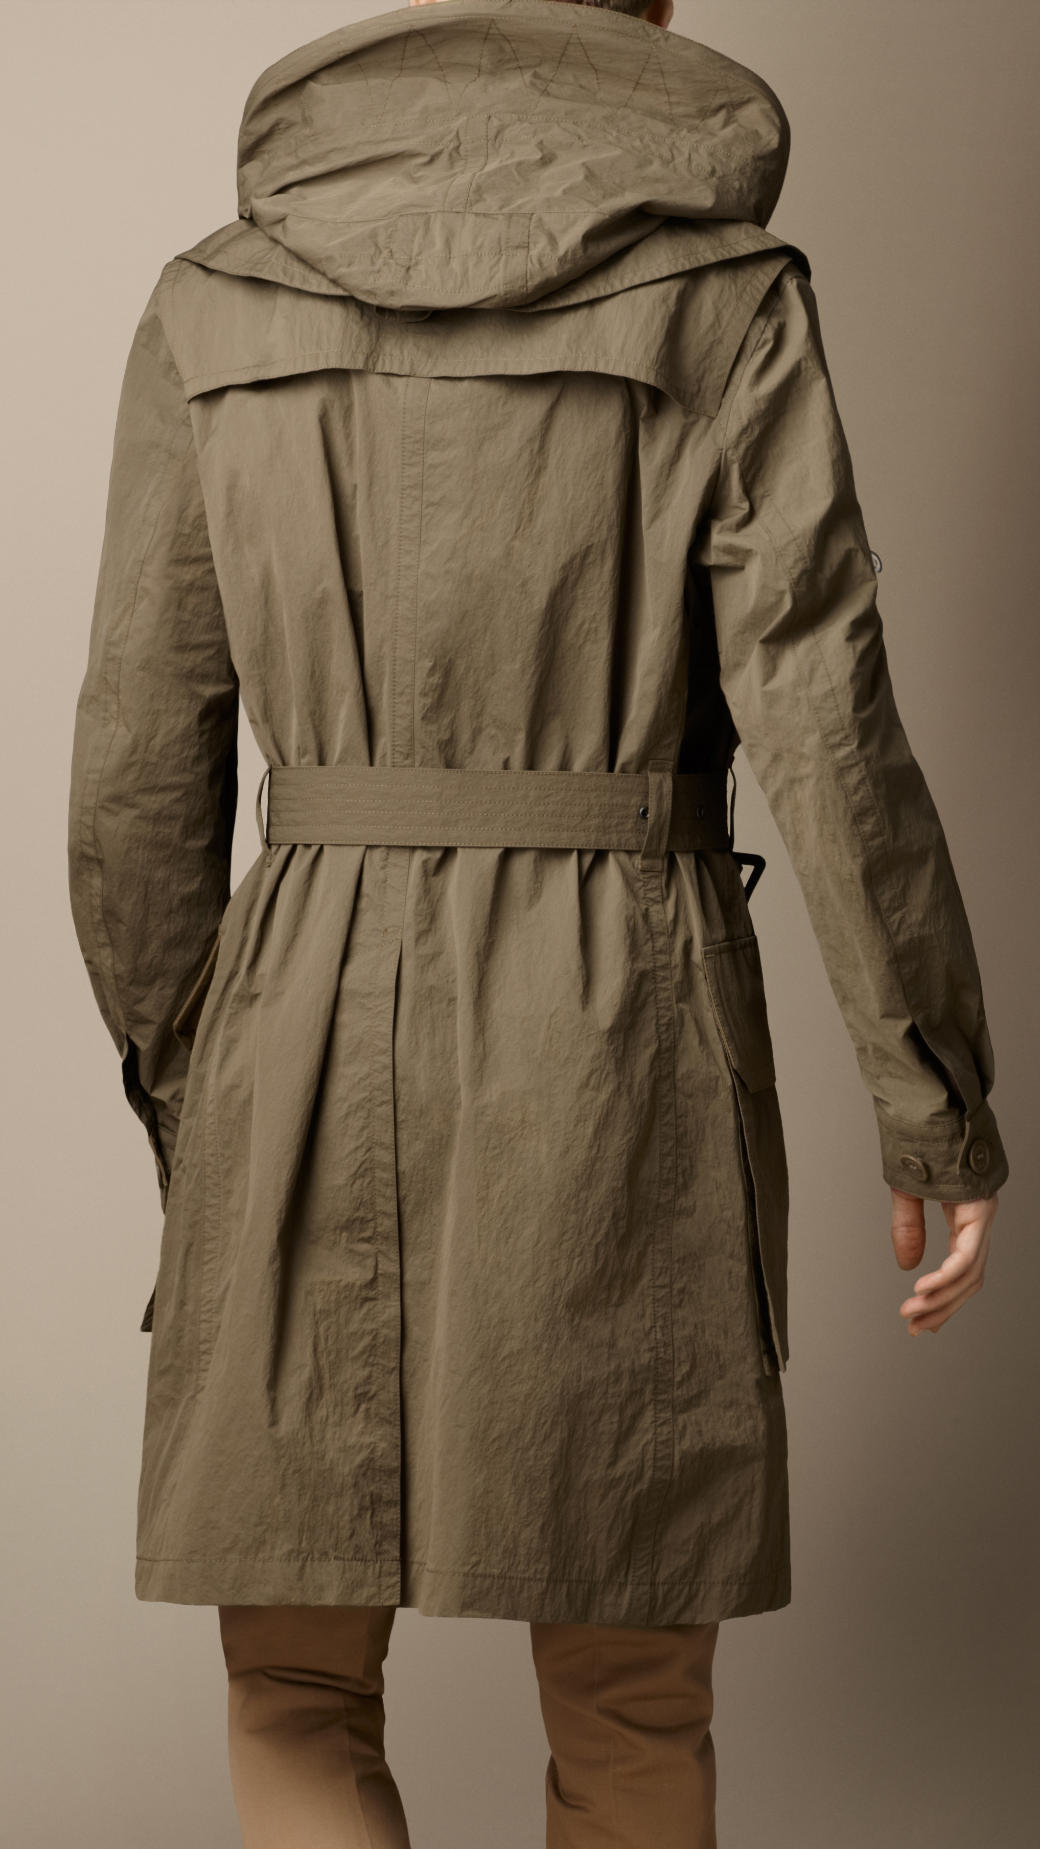 Burberry Brit Long Hooded Trench Coat in Natural for Men - Lyst